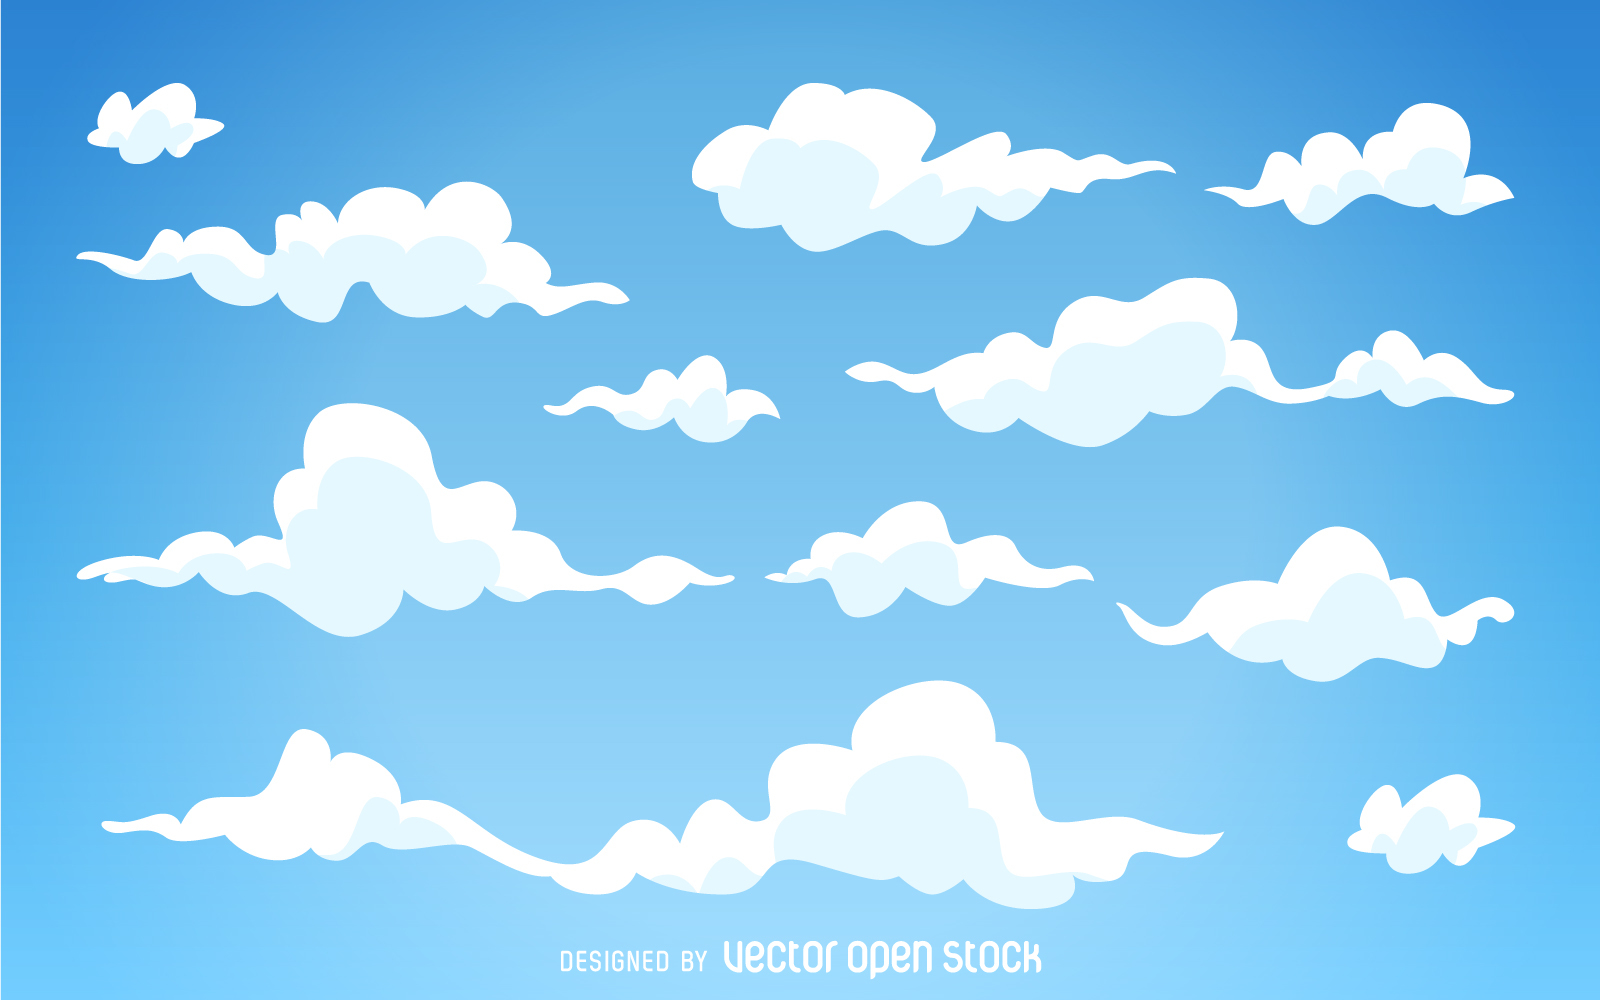 Illustrated cartoon clouds background - Vector download